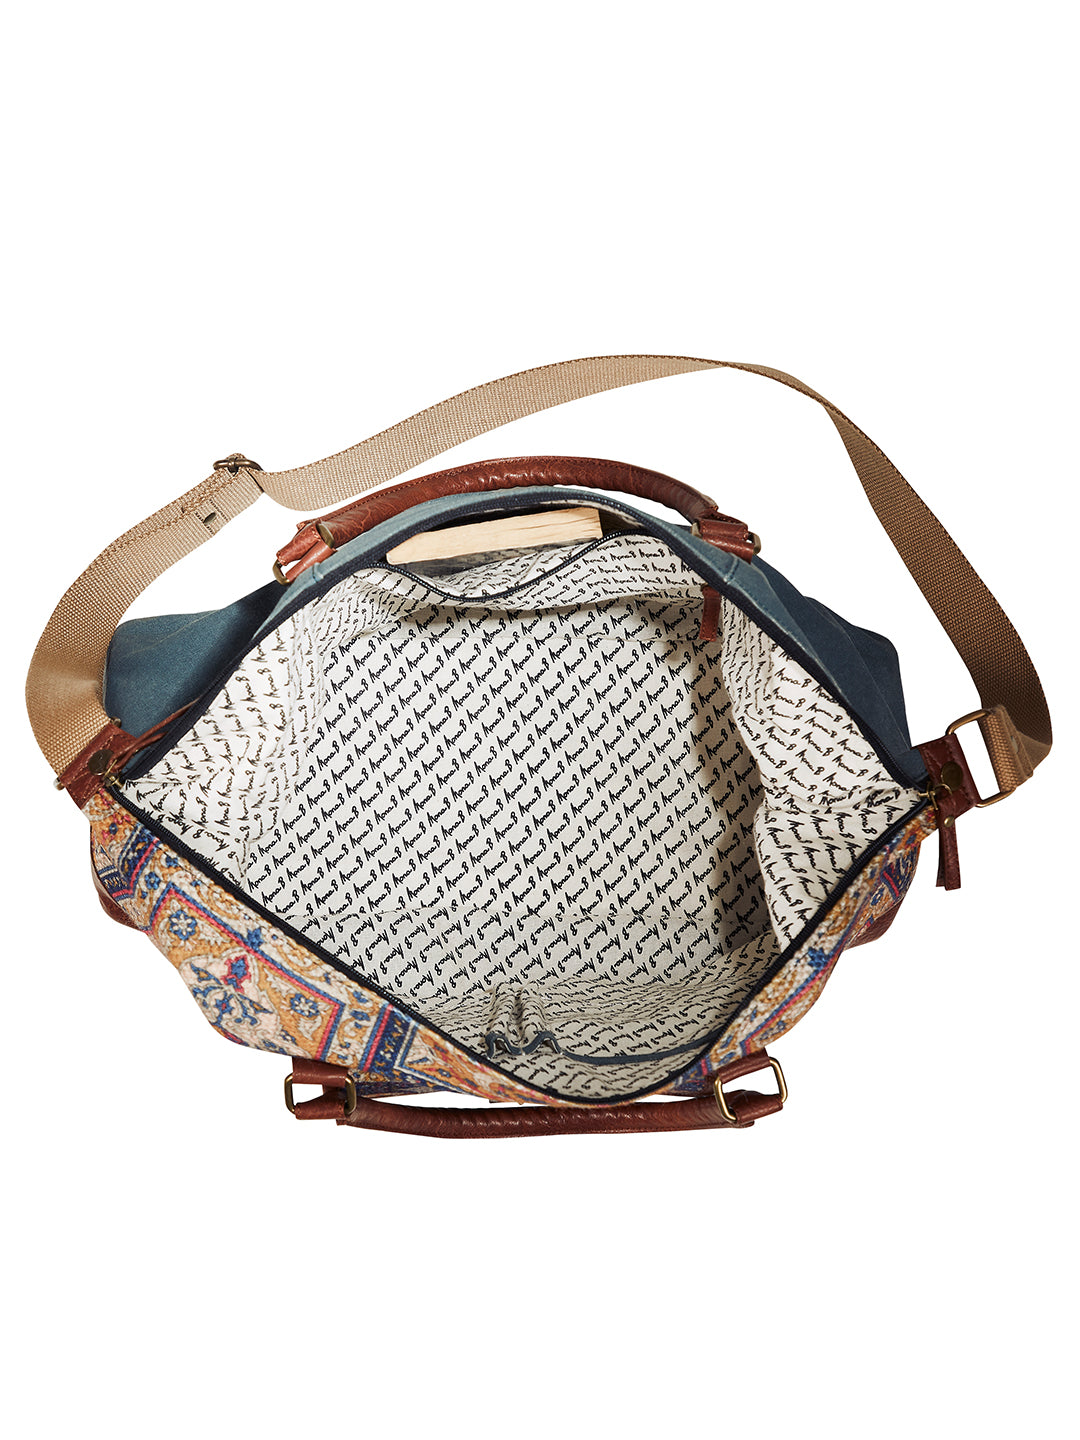 Mona B Large Kilim Inspired Duffel Gym Travel and Sports Bag with Outside Pocket and Stylish Design for Women: Chocolate